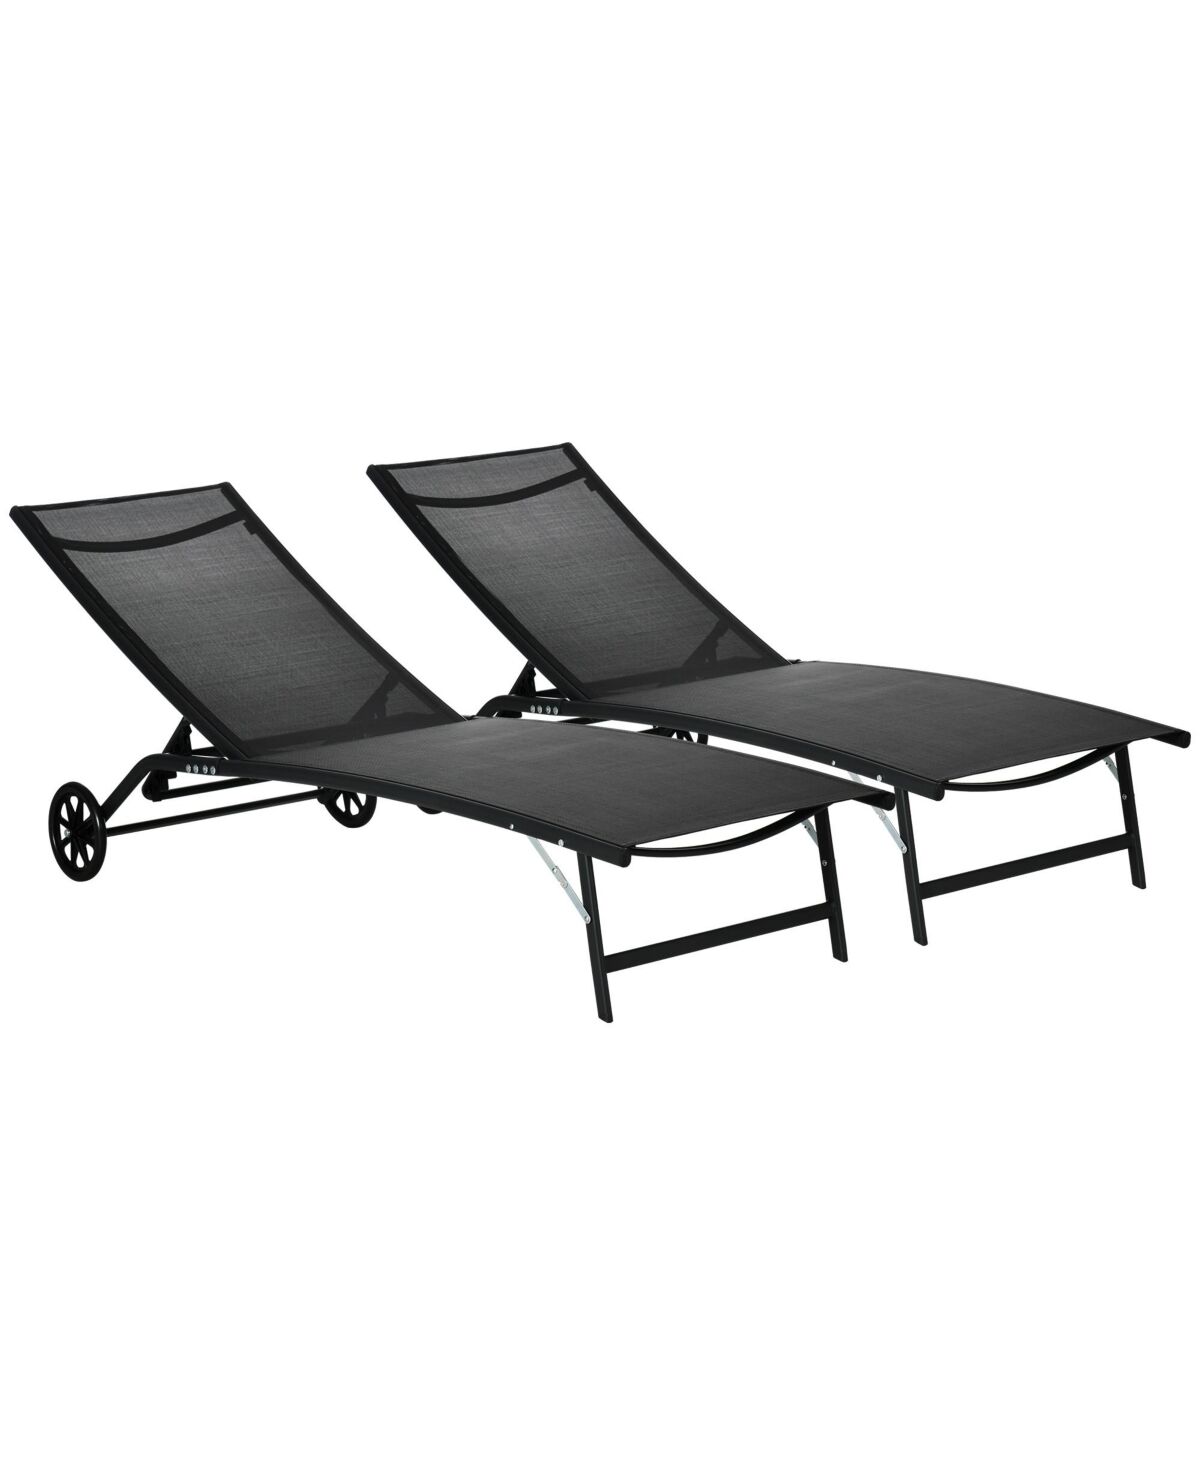 Outsunny Patio Chaise Lounge Chair Set of 2, 2 Piece Outdoor Recliner with Wheels, 5 Level Adjustable Backrest for Garden, Deck & Poolside, Black - Bl